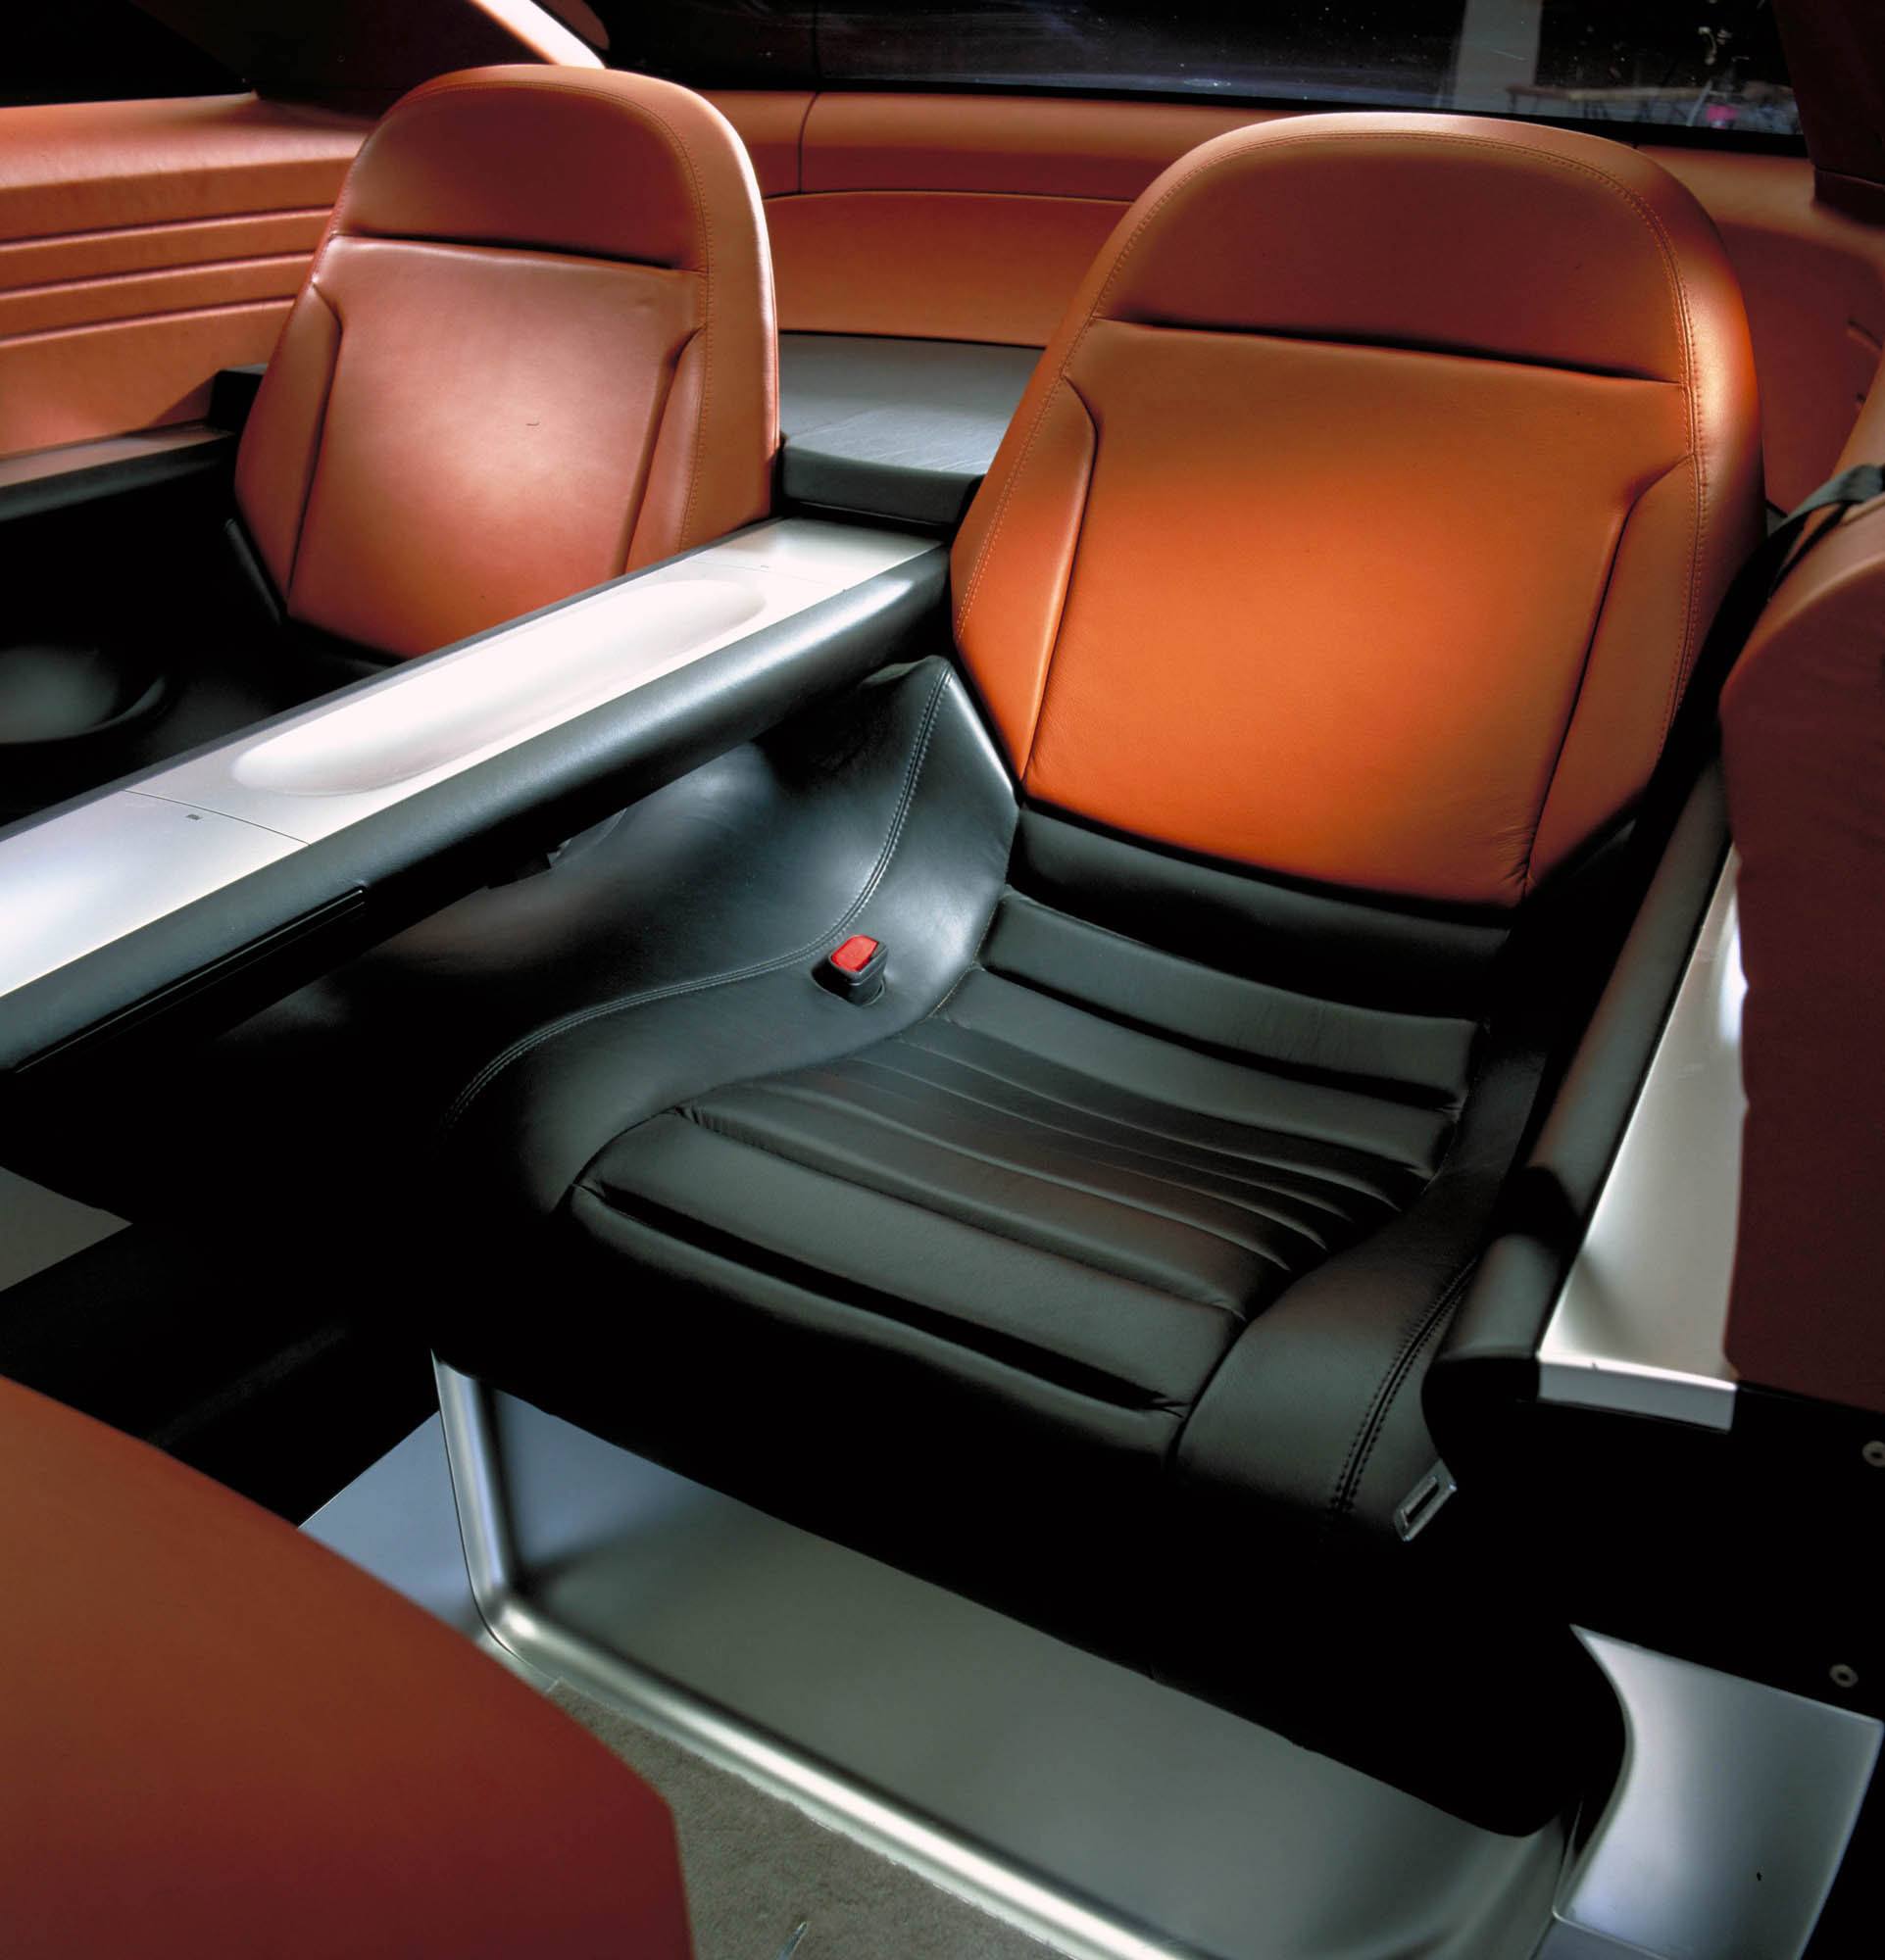 Ford Forty-Nine Concept, 2001 - Interior